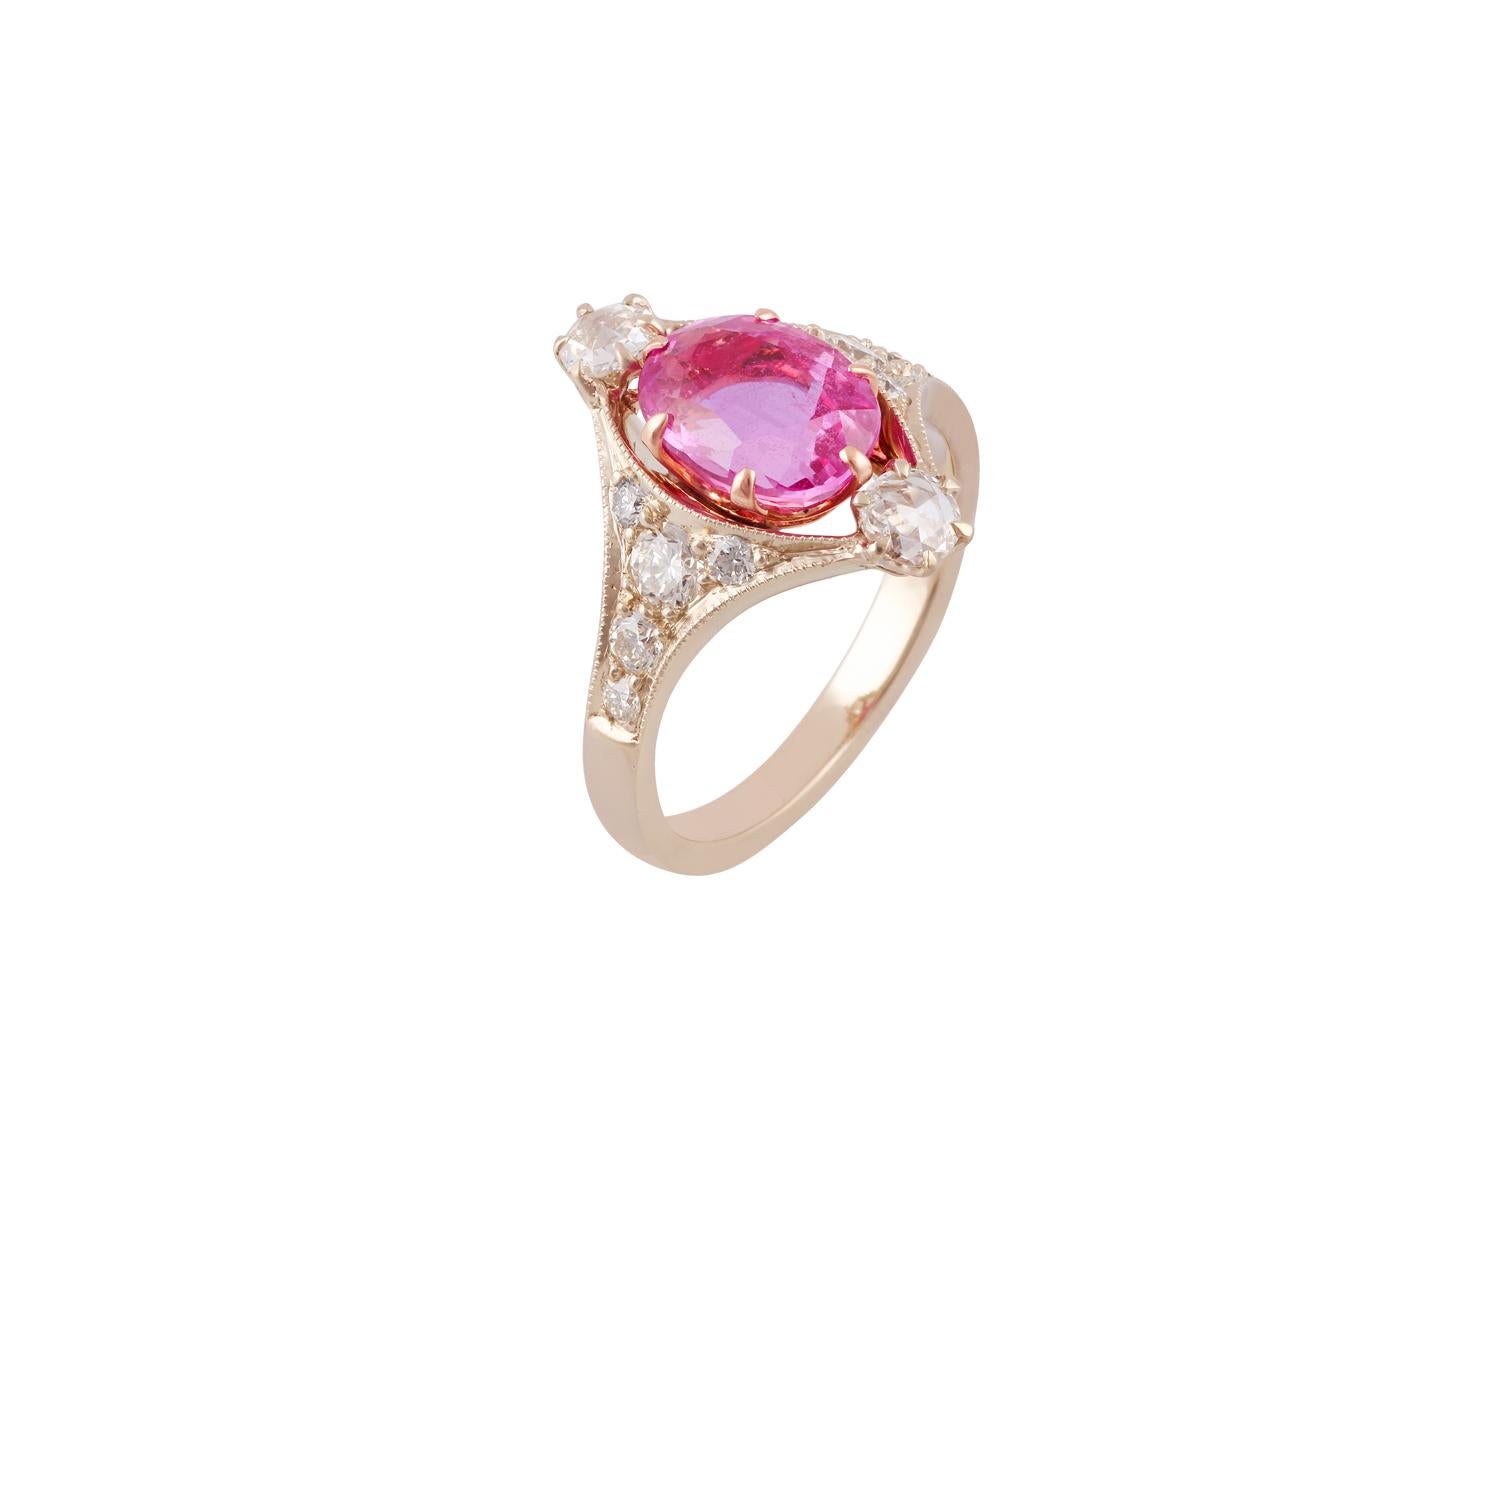 Contemporary 2.74 Carat Pink Sapphire and Diamond Ring Studded in Matte White Gold For Sale